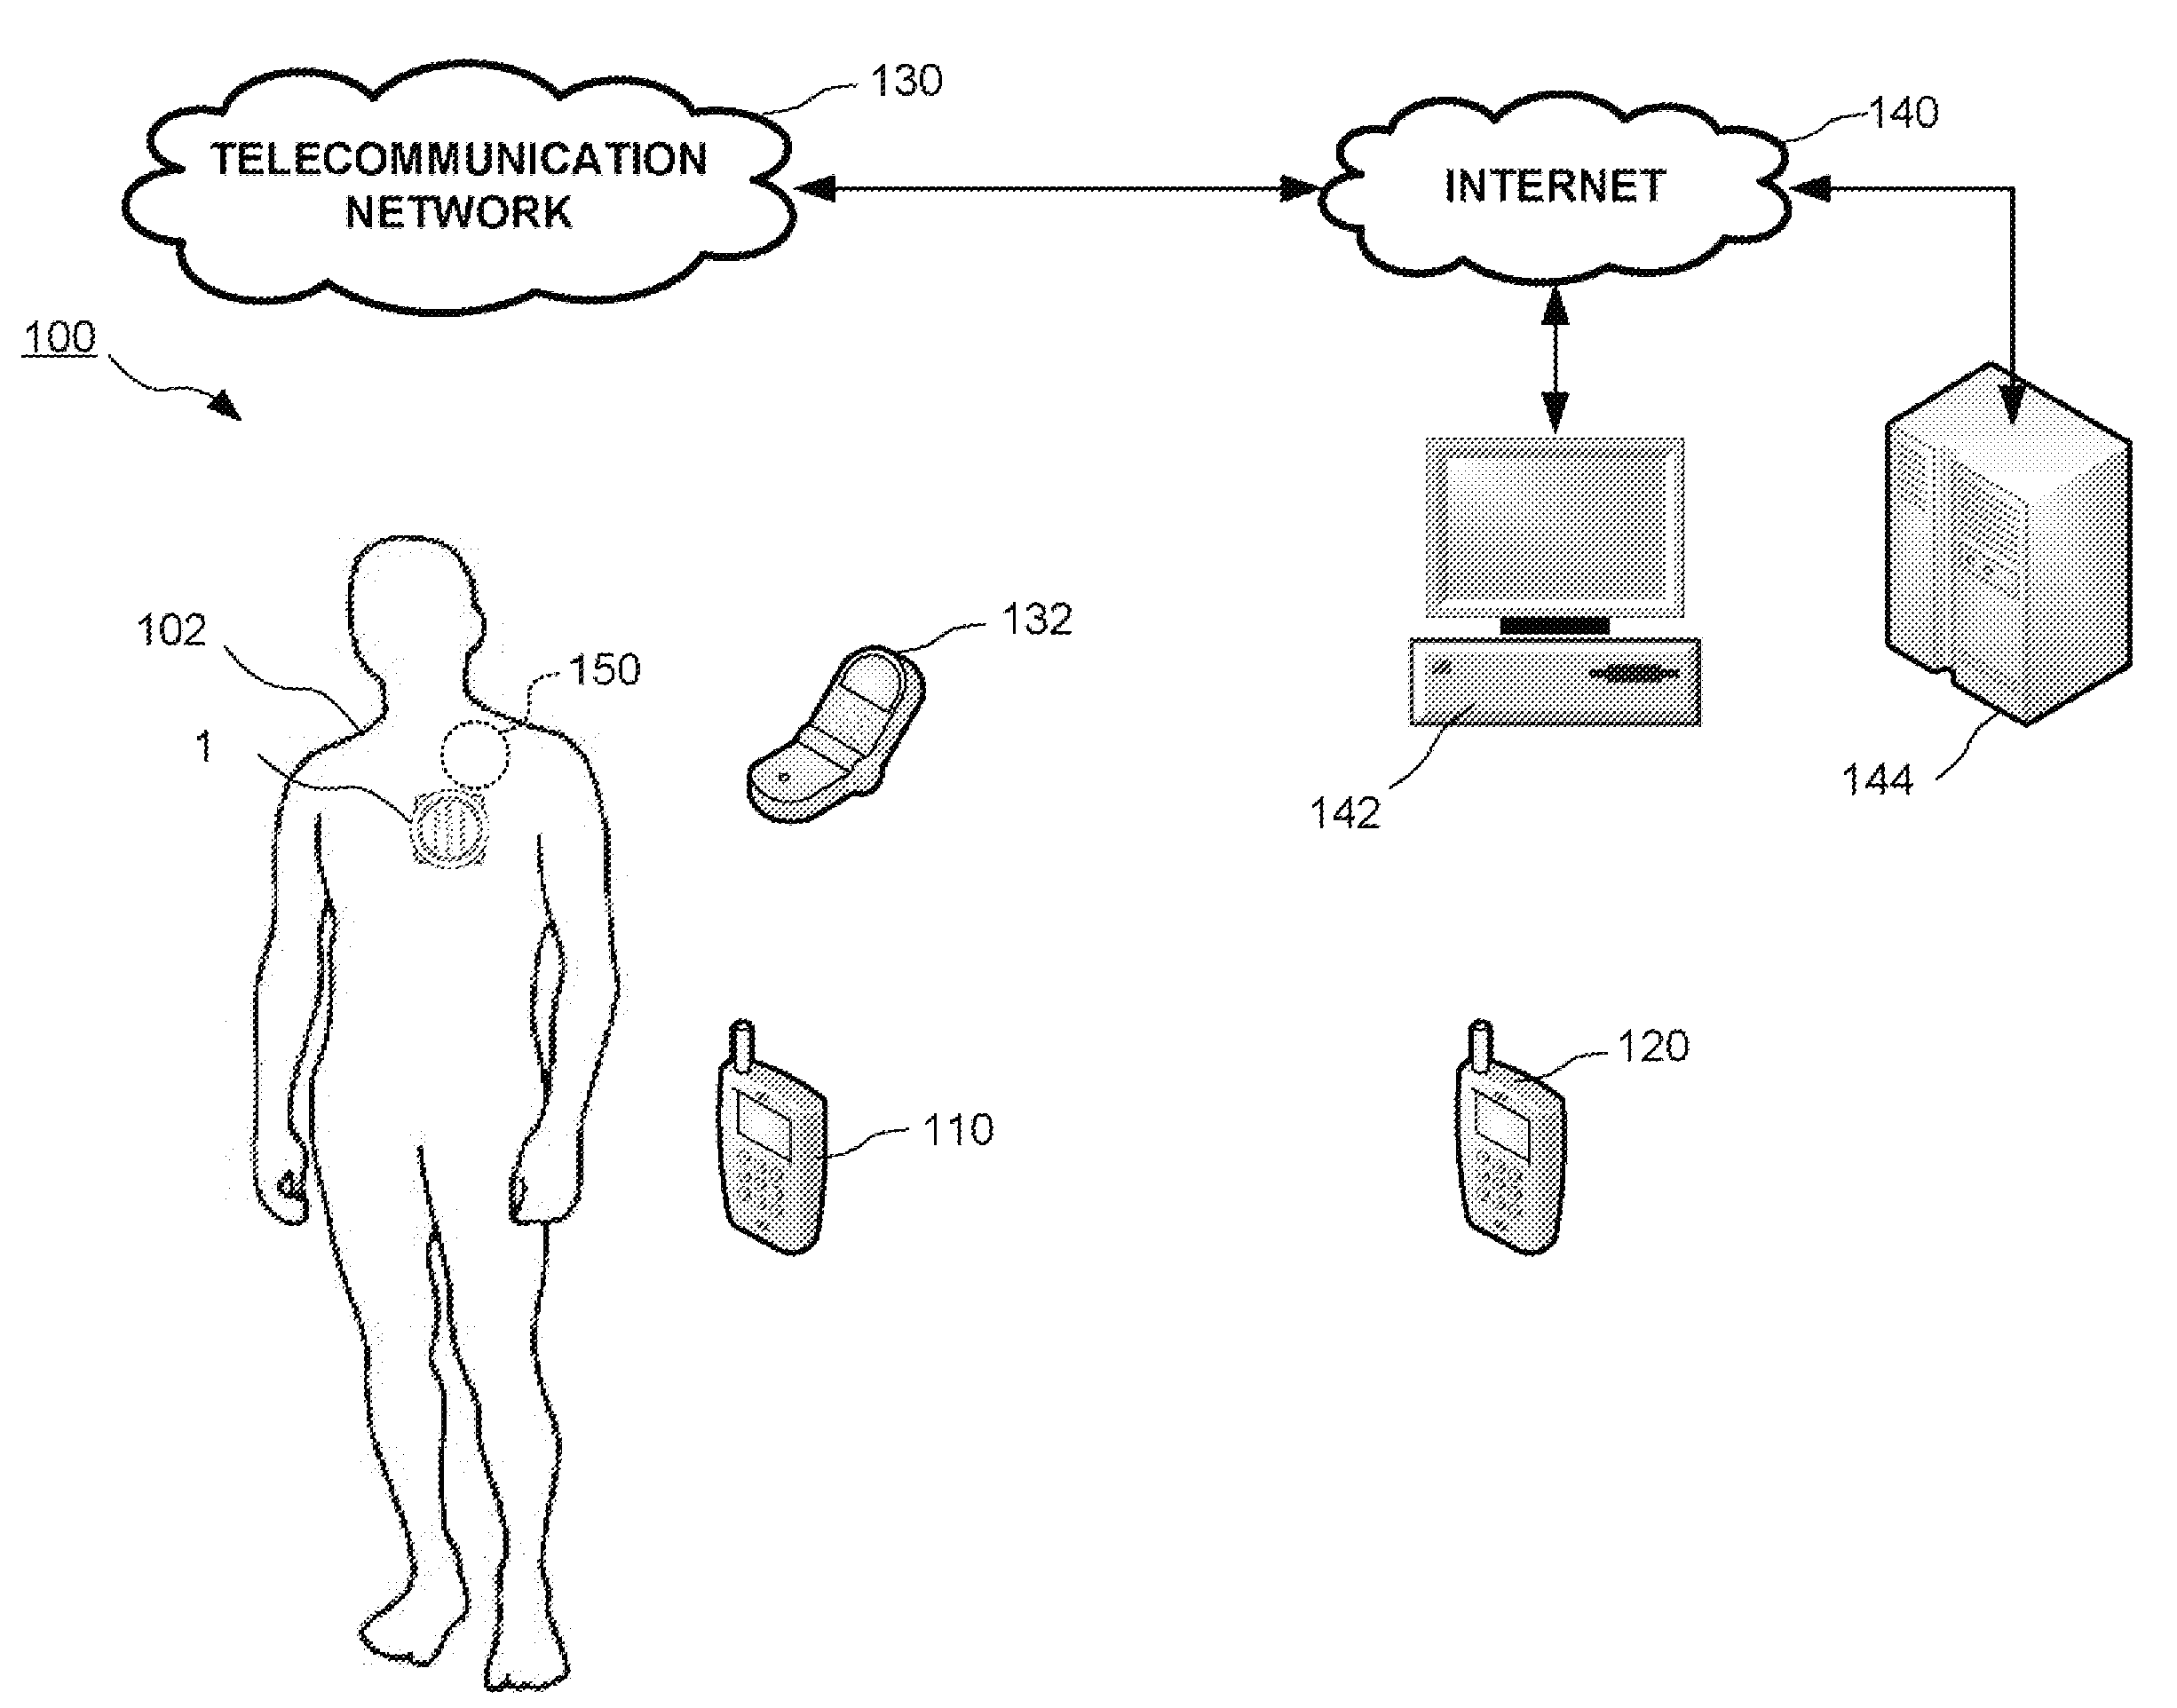 Method and system for monitoring a health condition